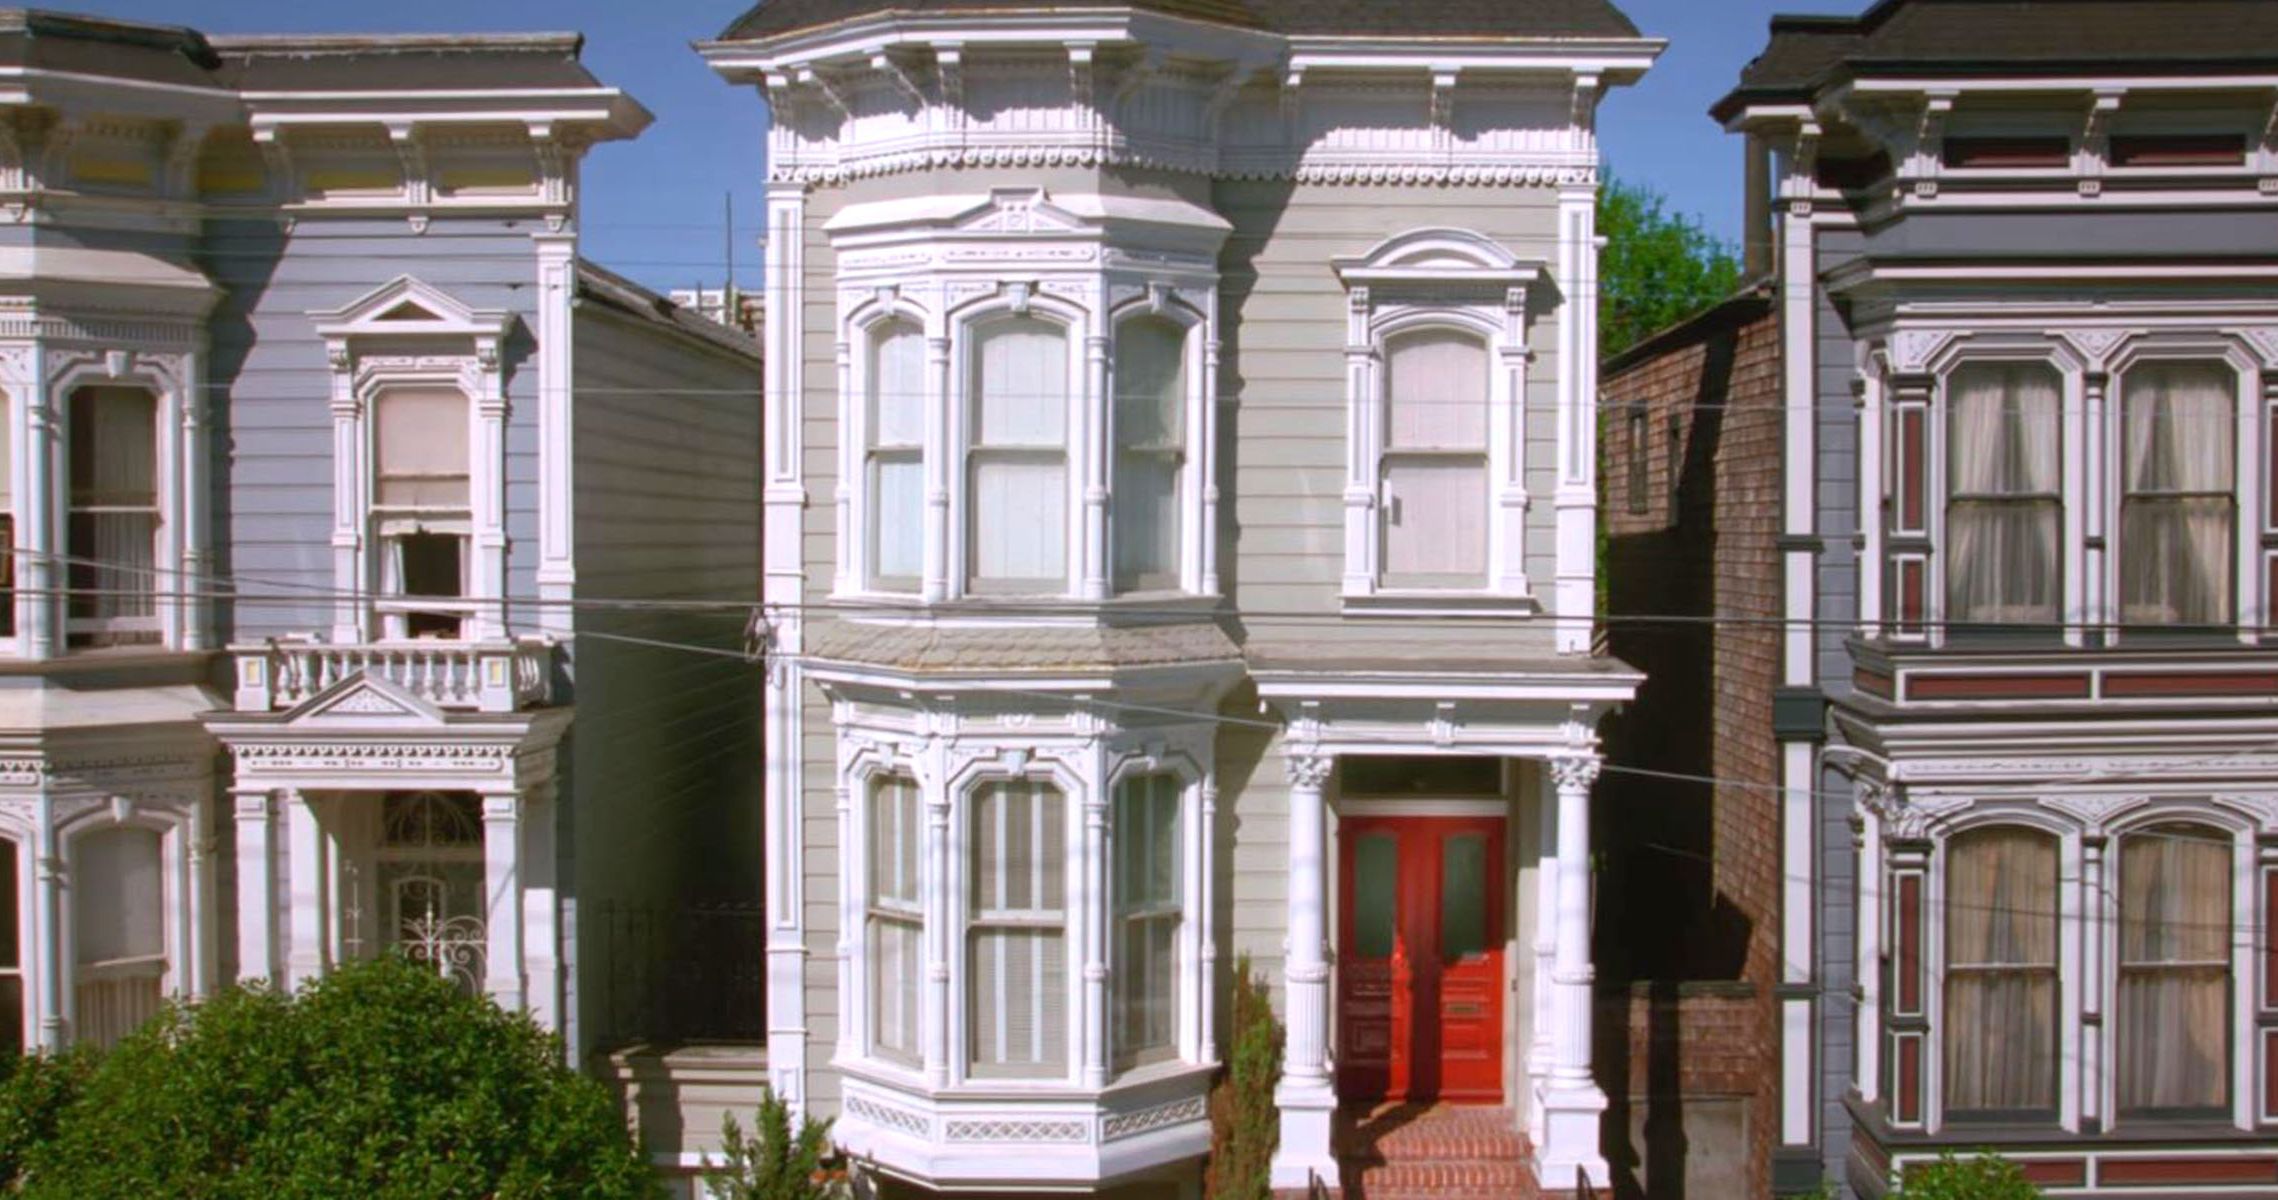 The Real Full House Tanner Home Is Back on the Market